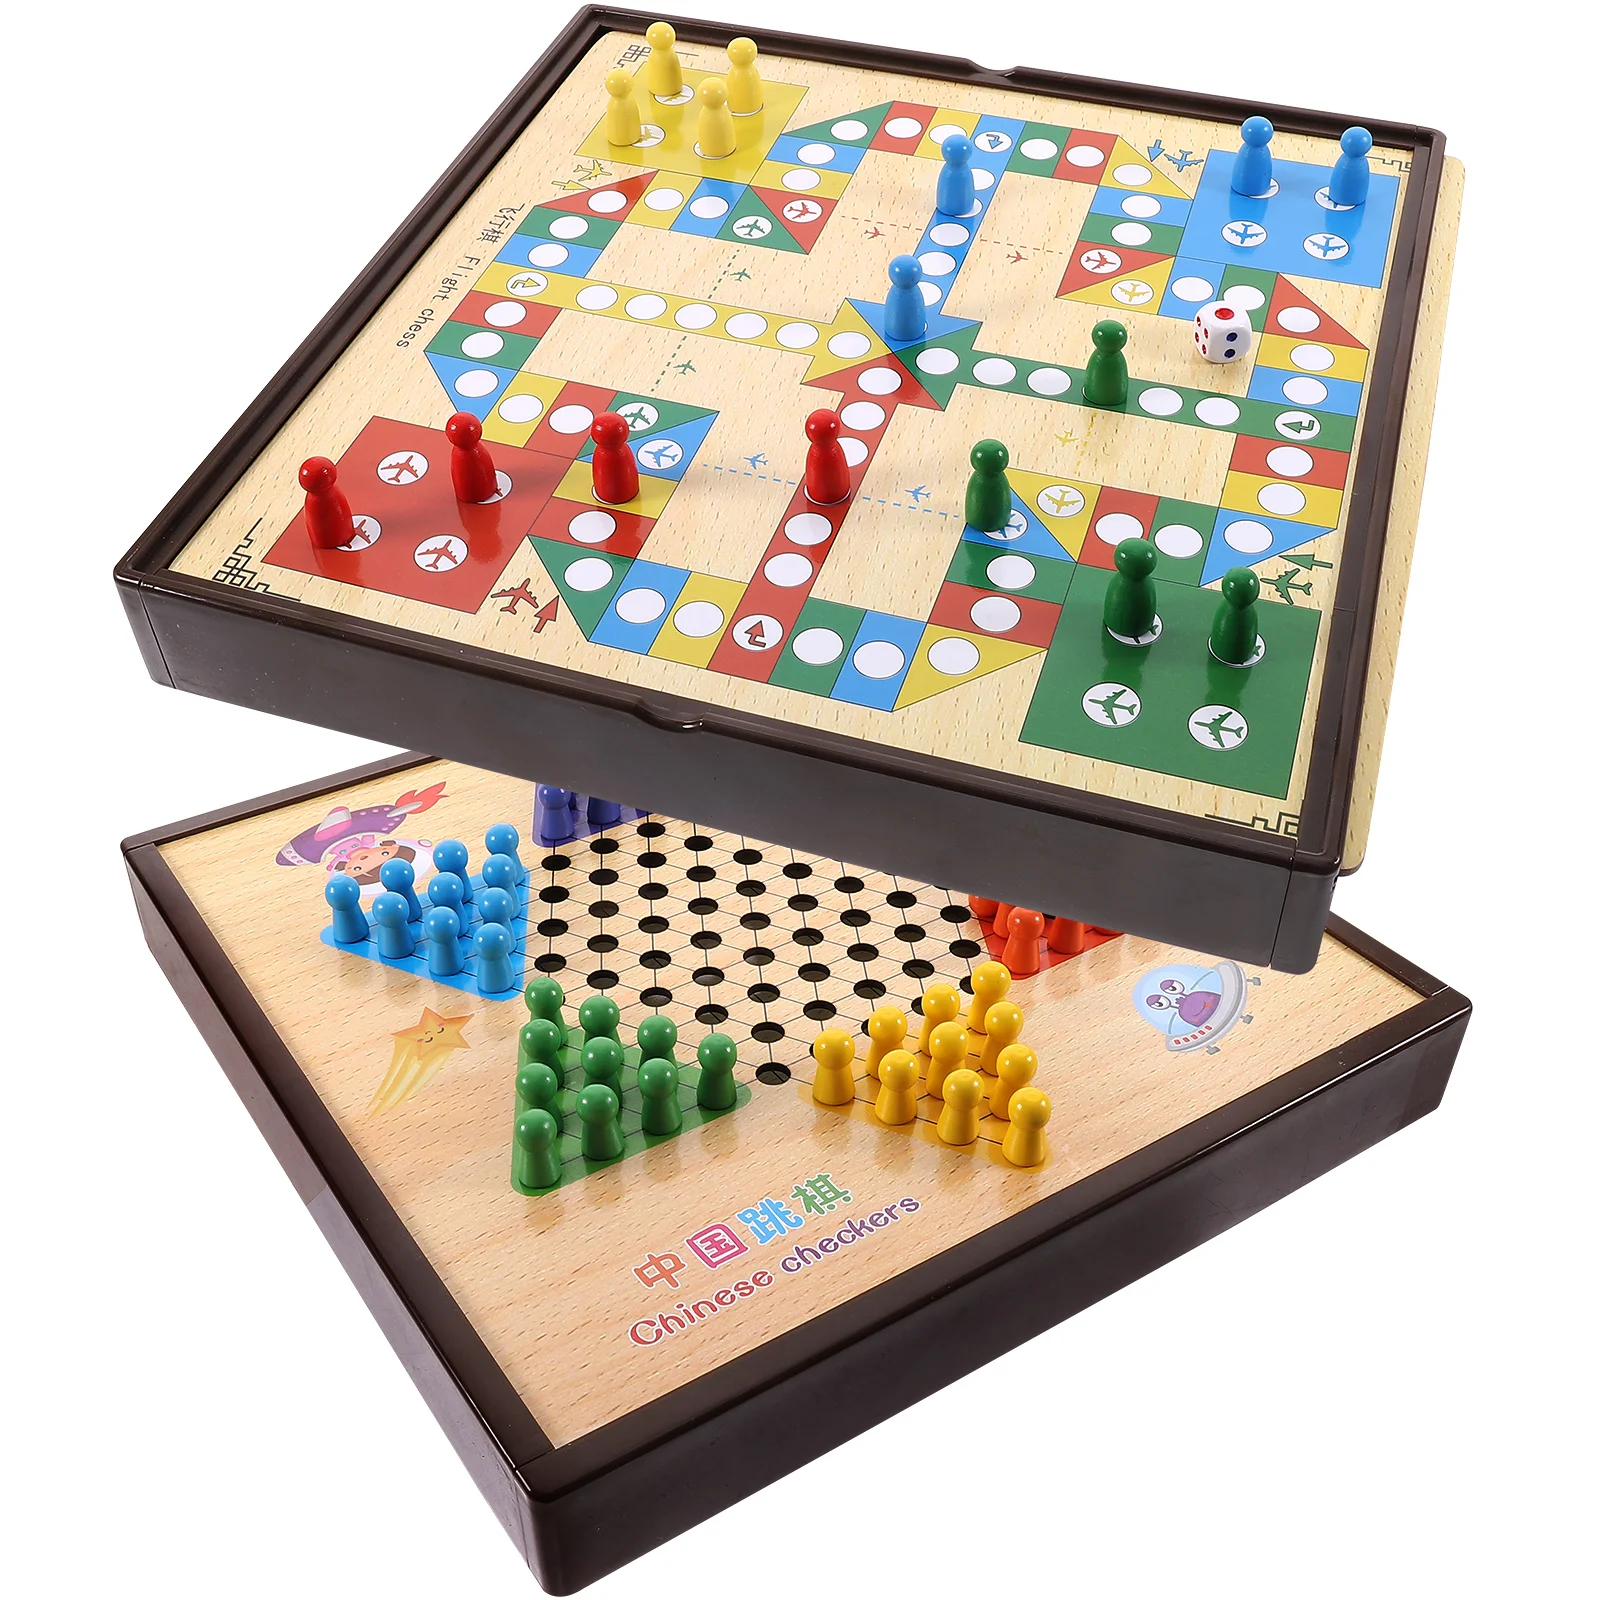 Educational Gift Toys for Children and Students Flying Chess Game Board Carpet Backgammon Kids Wooden Desk Playset ship rudder lighthouse beach vintage wooden board bathroom curtain set non slip rug flannel carpet cover shower curtain bath mat